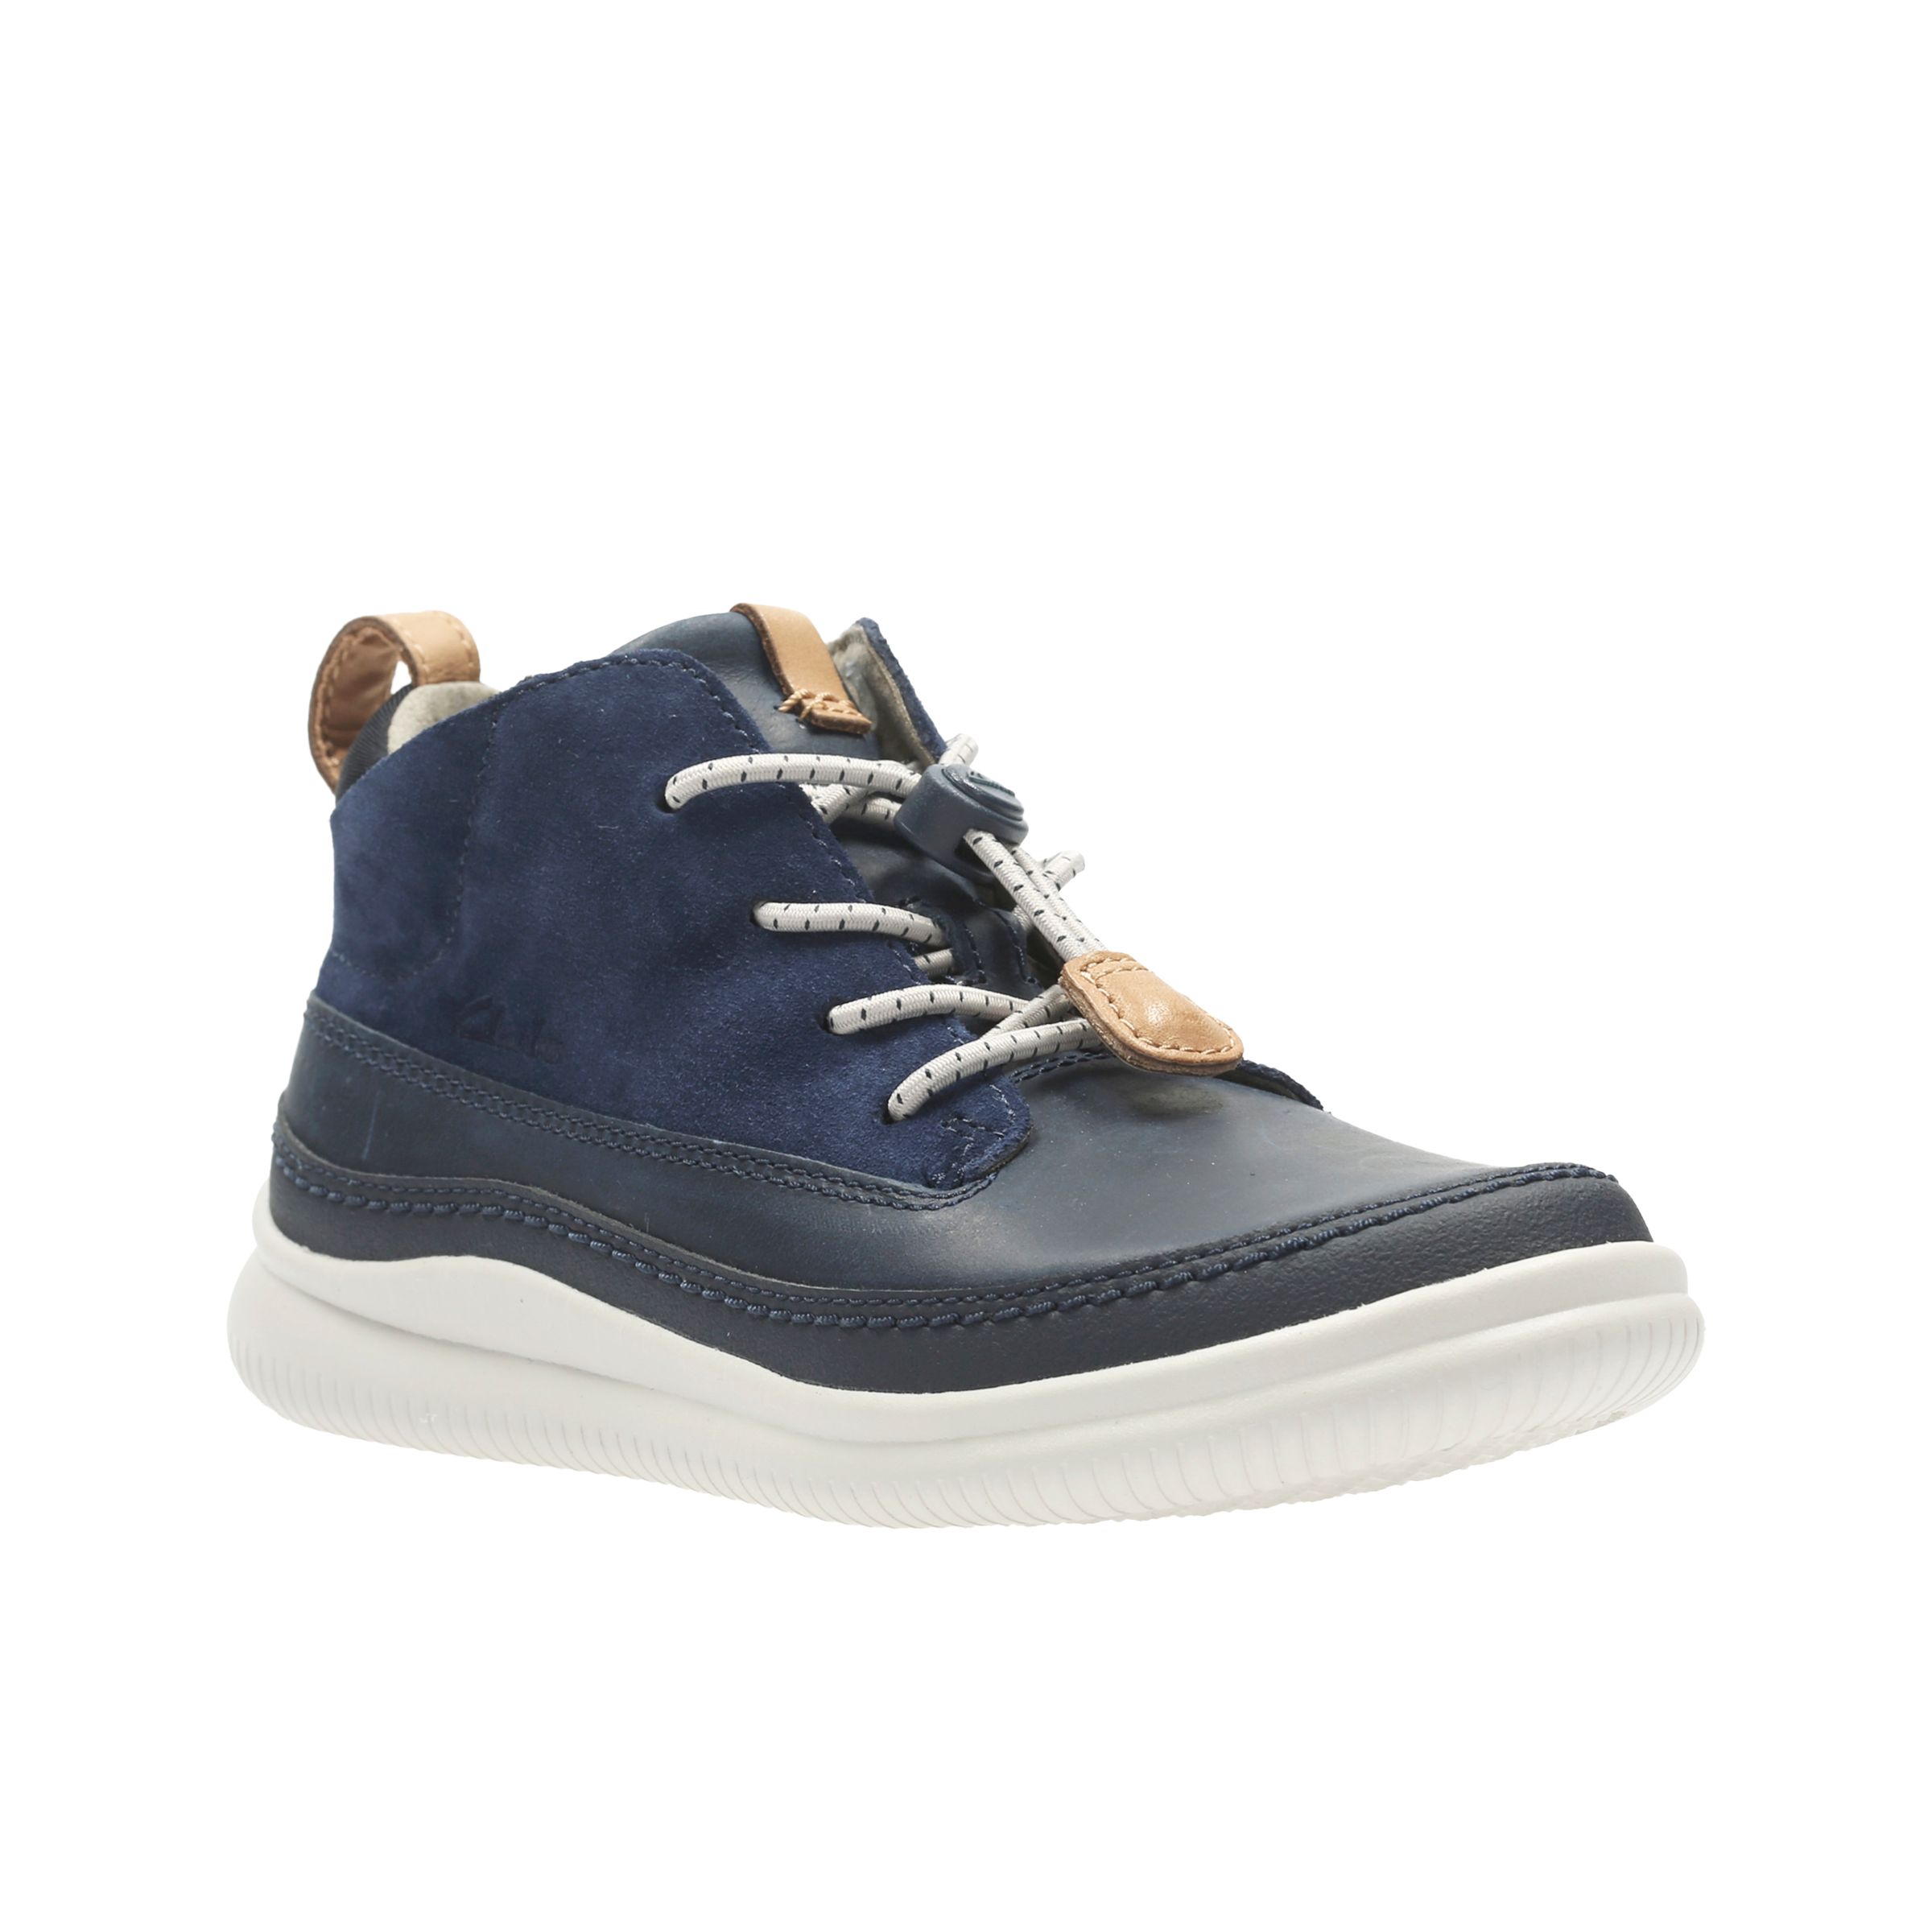 Clarks Junior Cloud Air Shoes, Navy at 